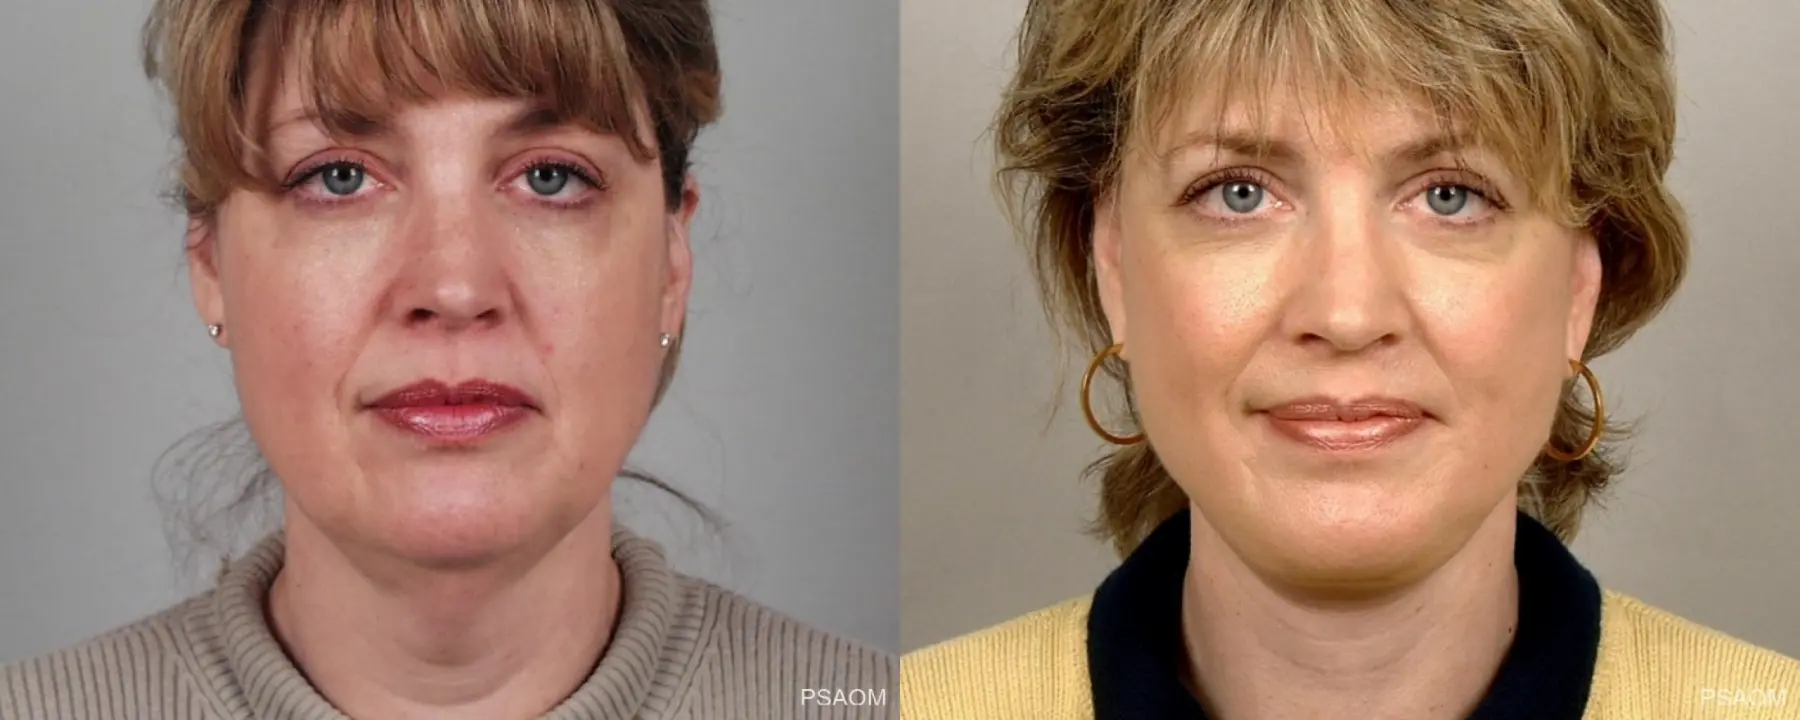 Facelift: Patient 1 - Before and After 1